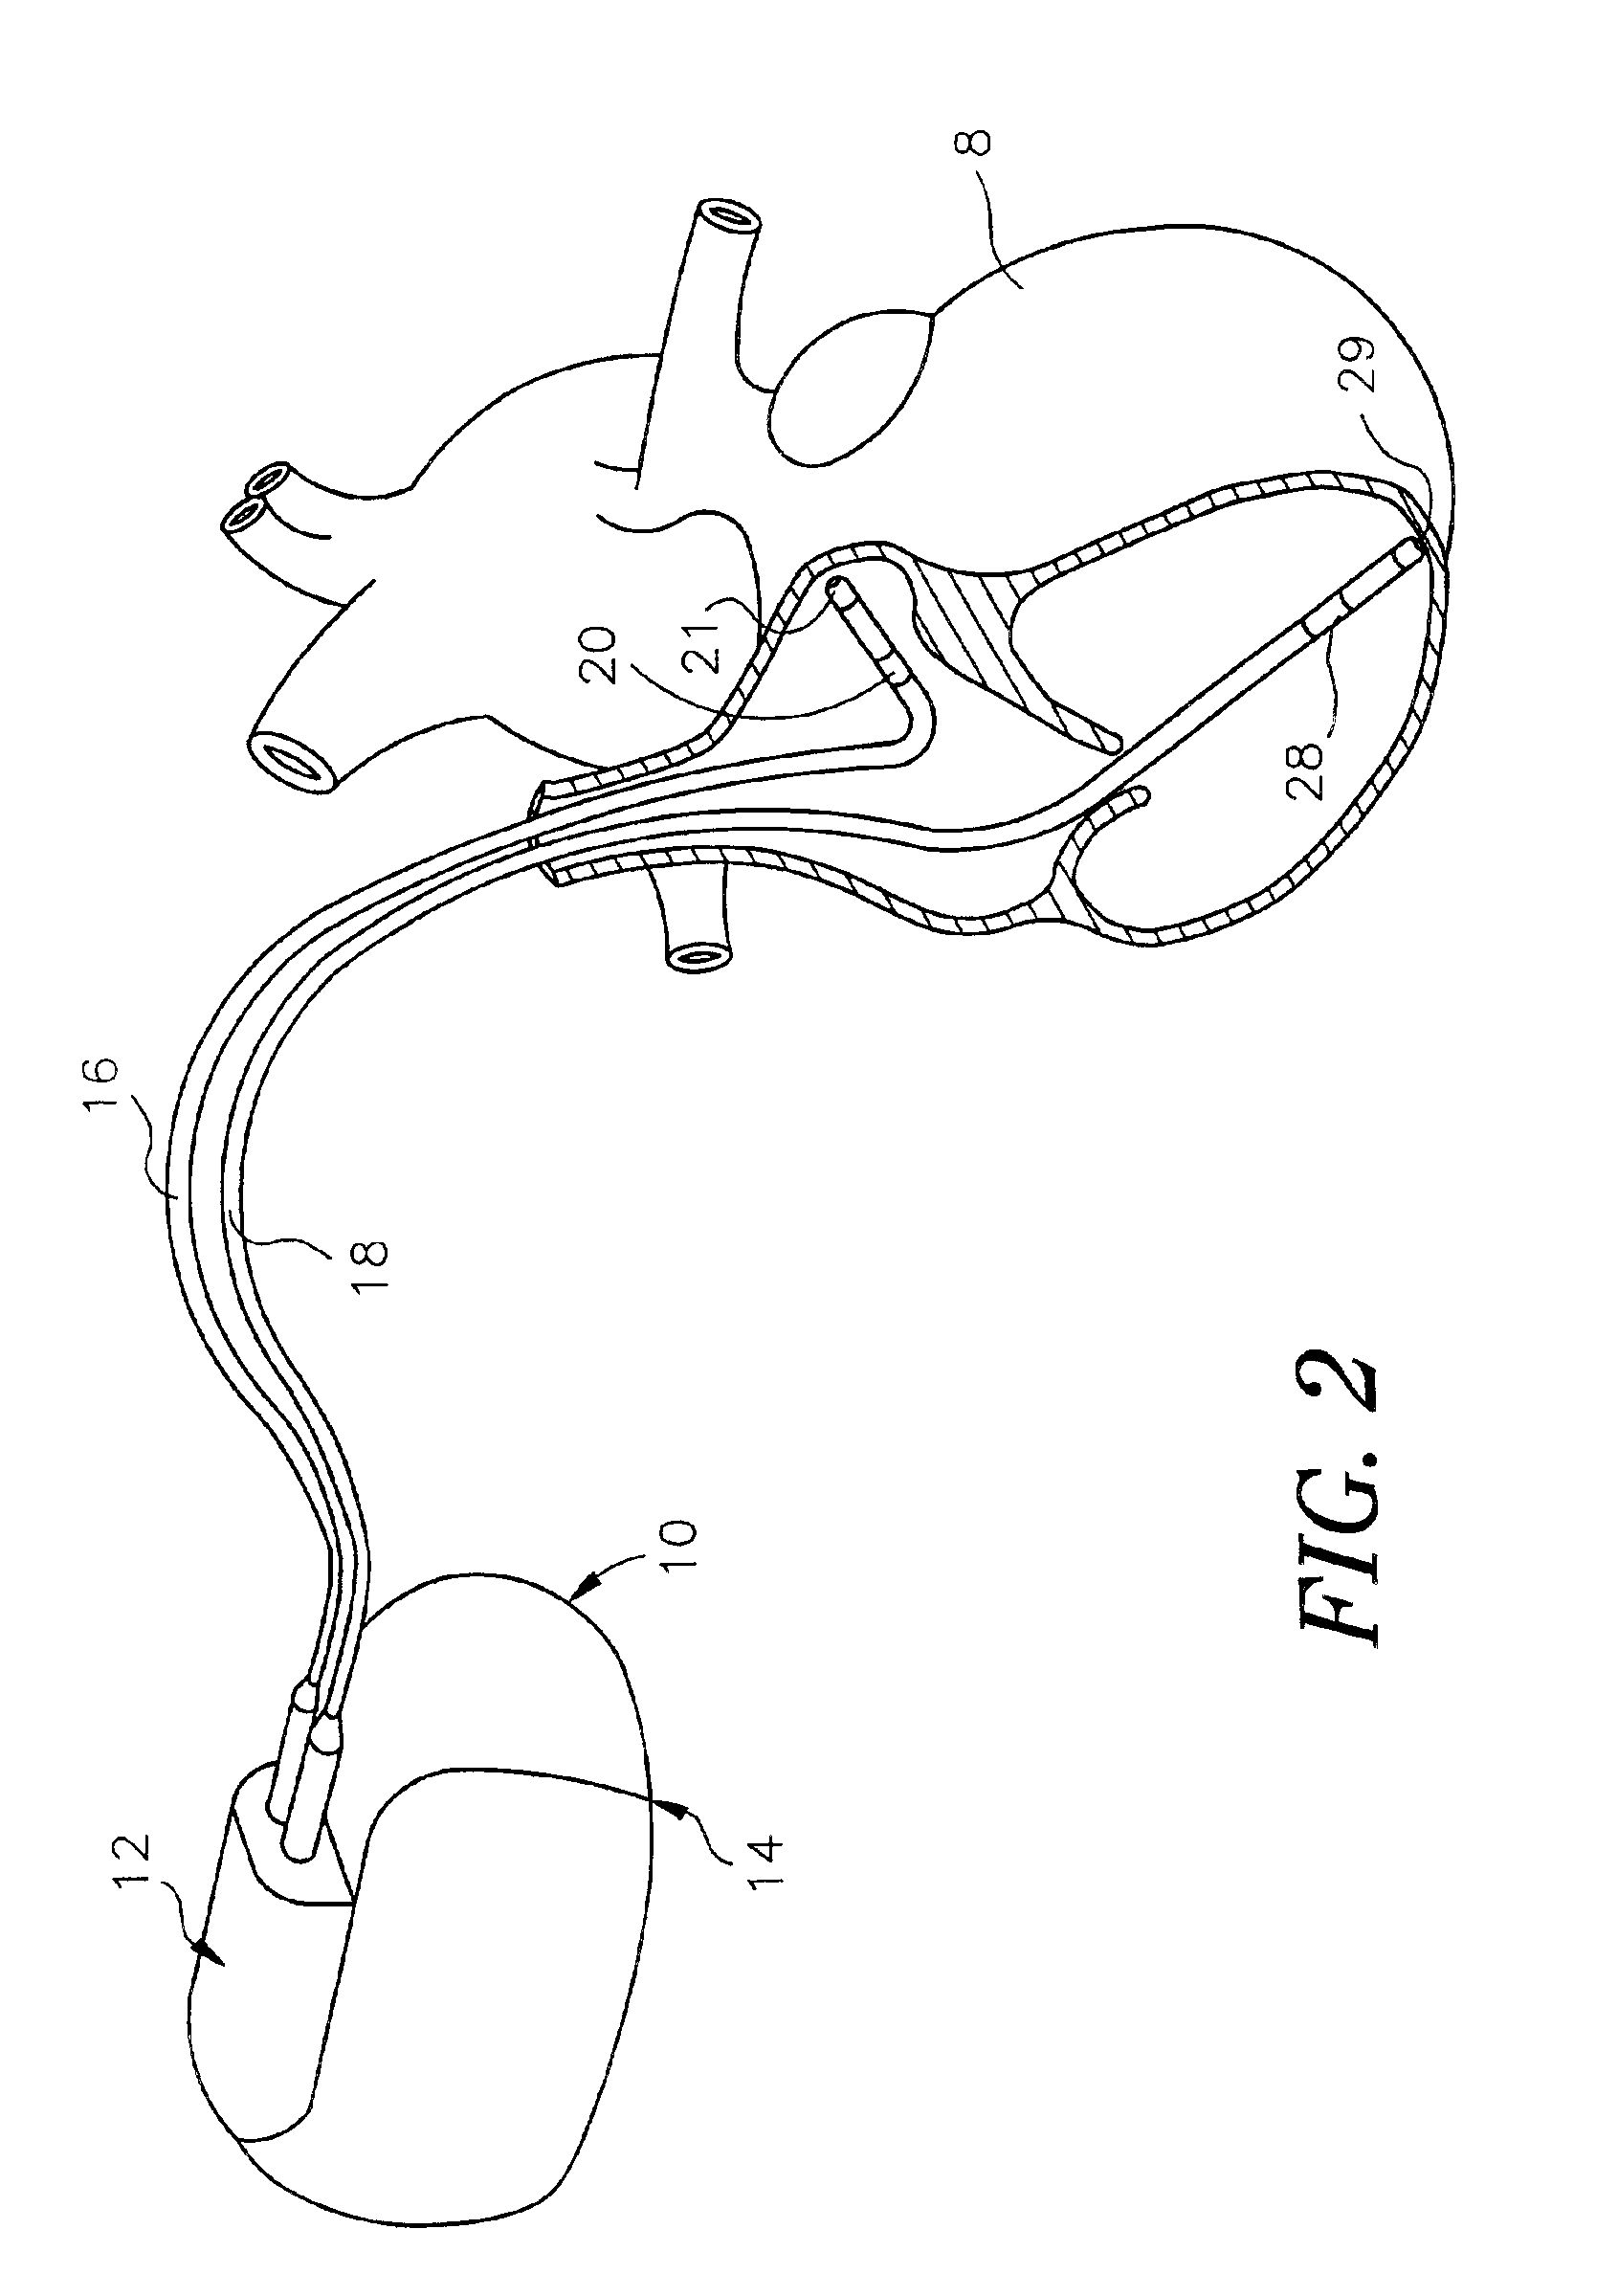 Methods for adjusting cardiac detection criteria and implantable medical devices using same